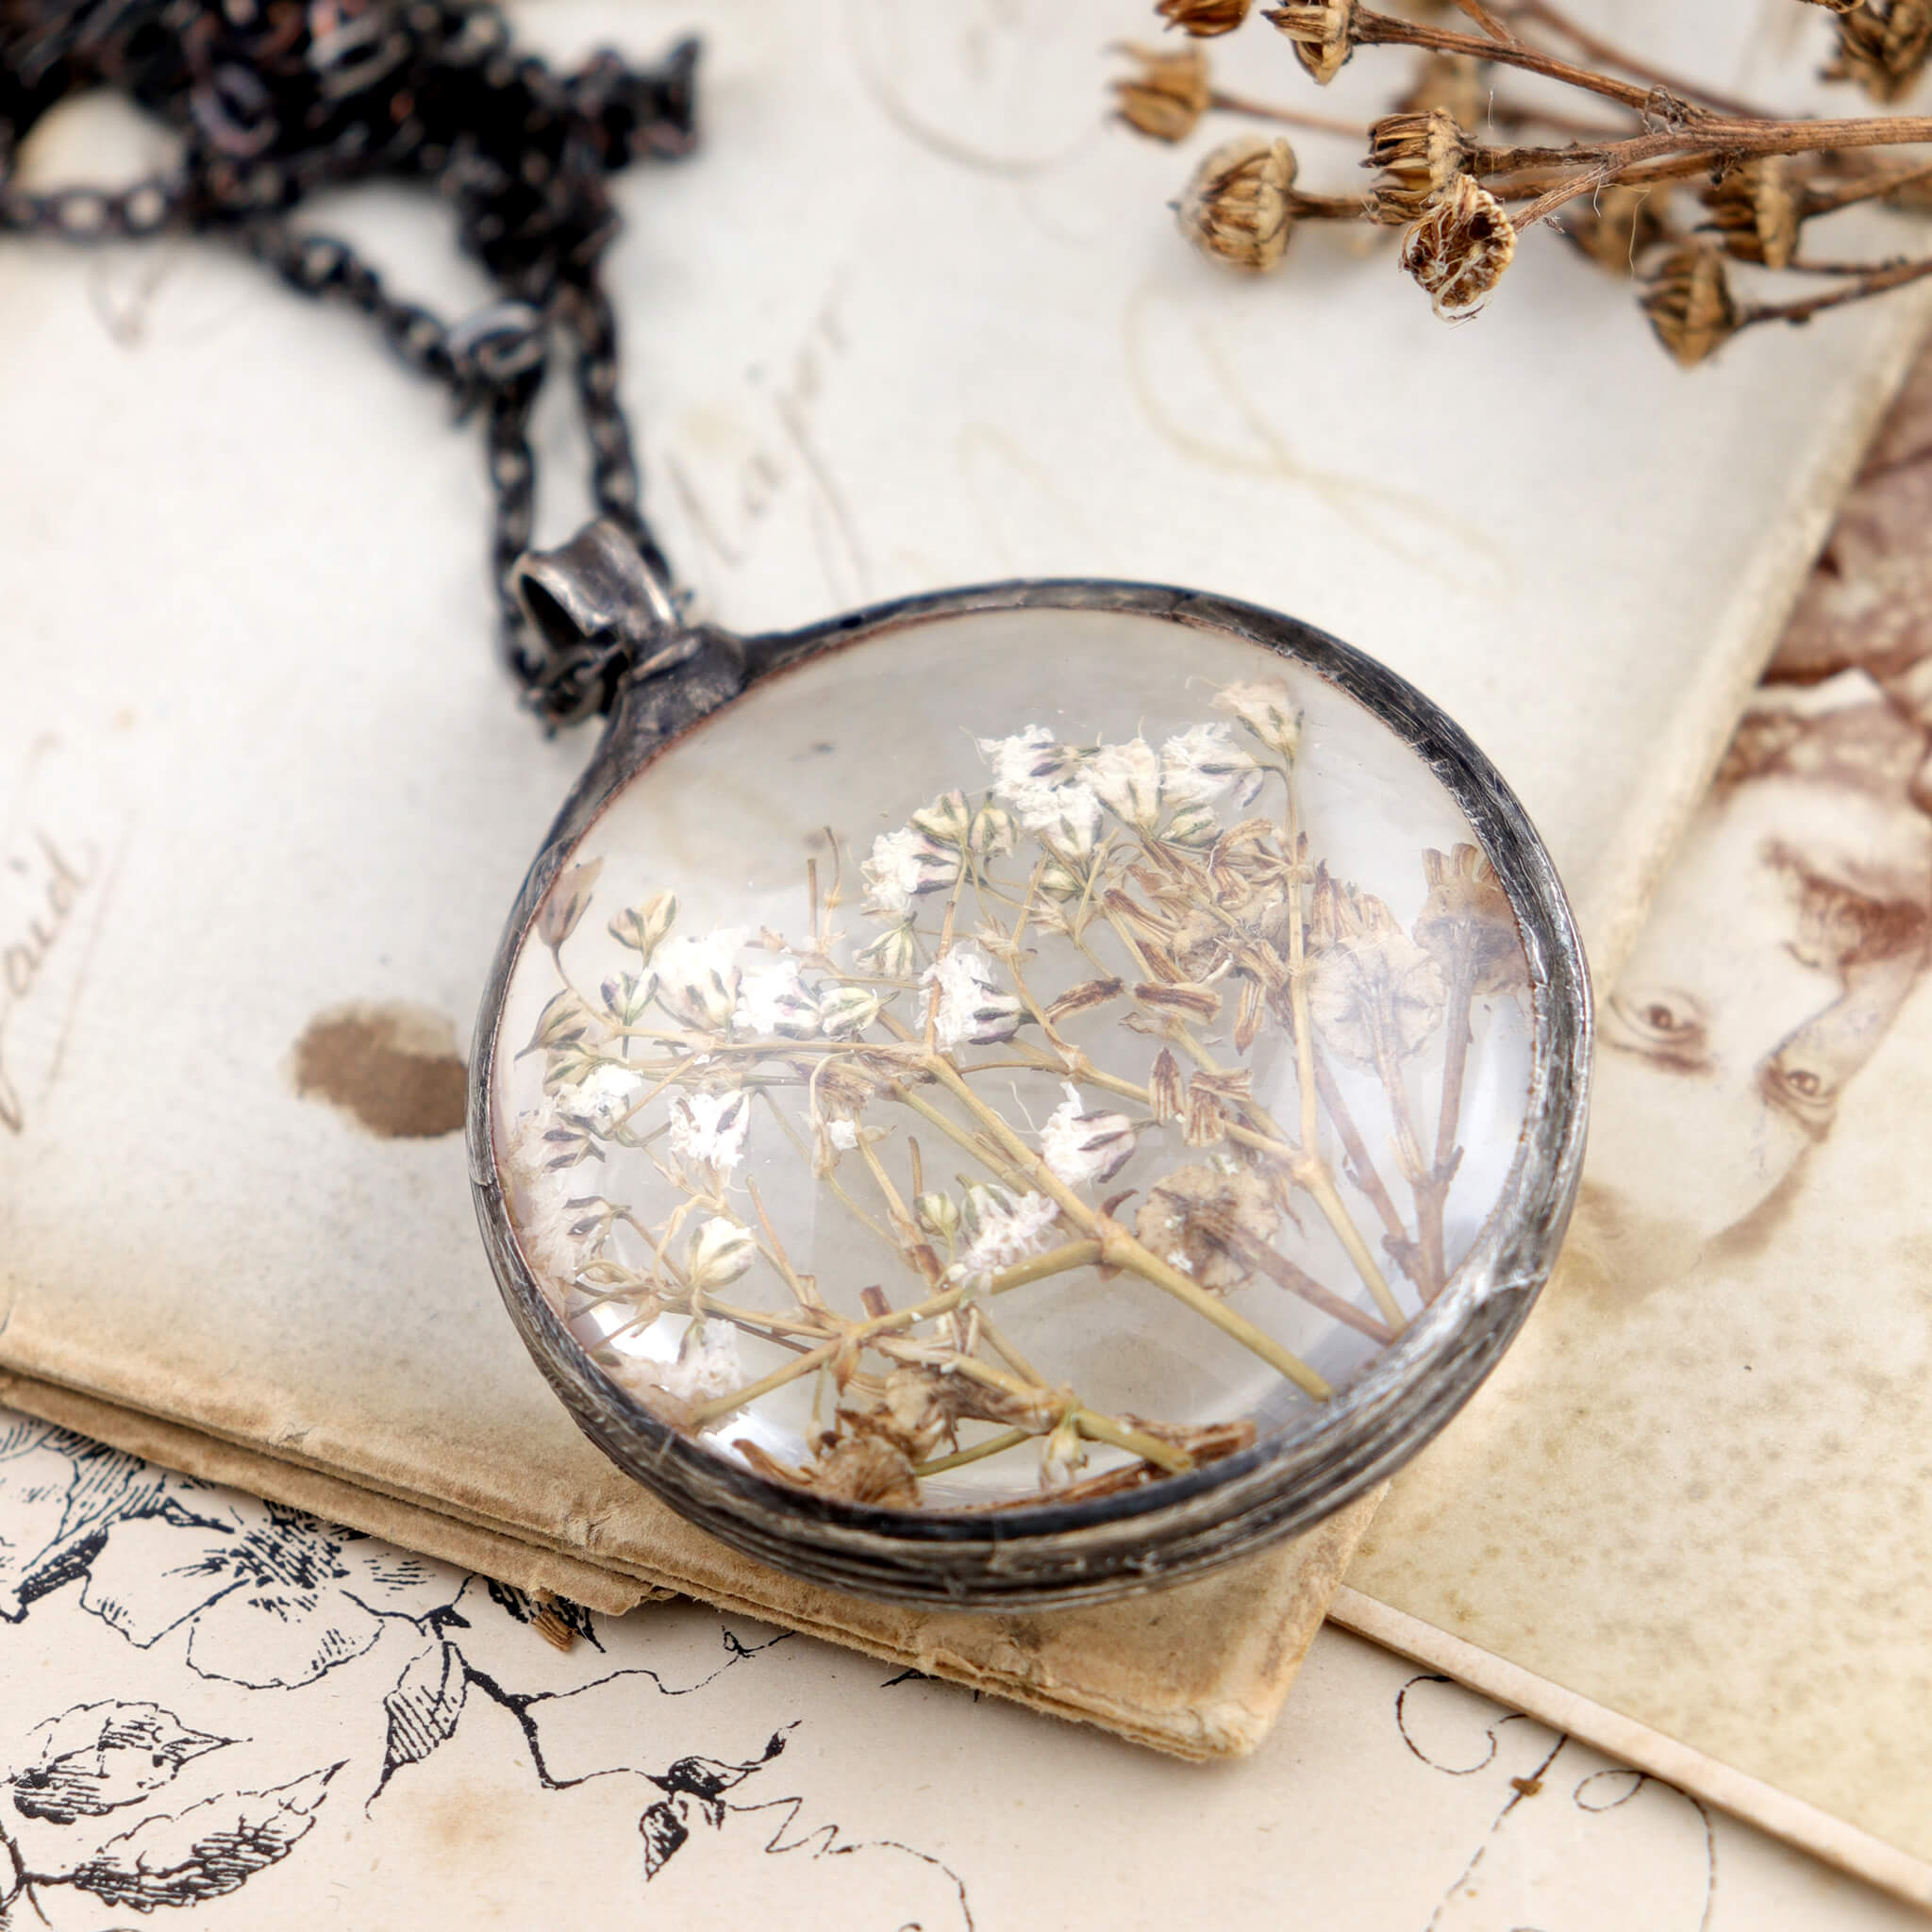 www. - Dried Flowers Vintage Long Chain Crystal Round Pendant  Necklace*